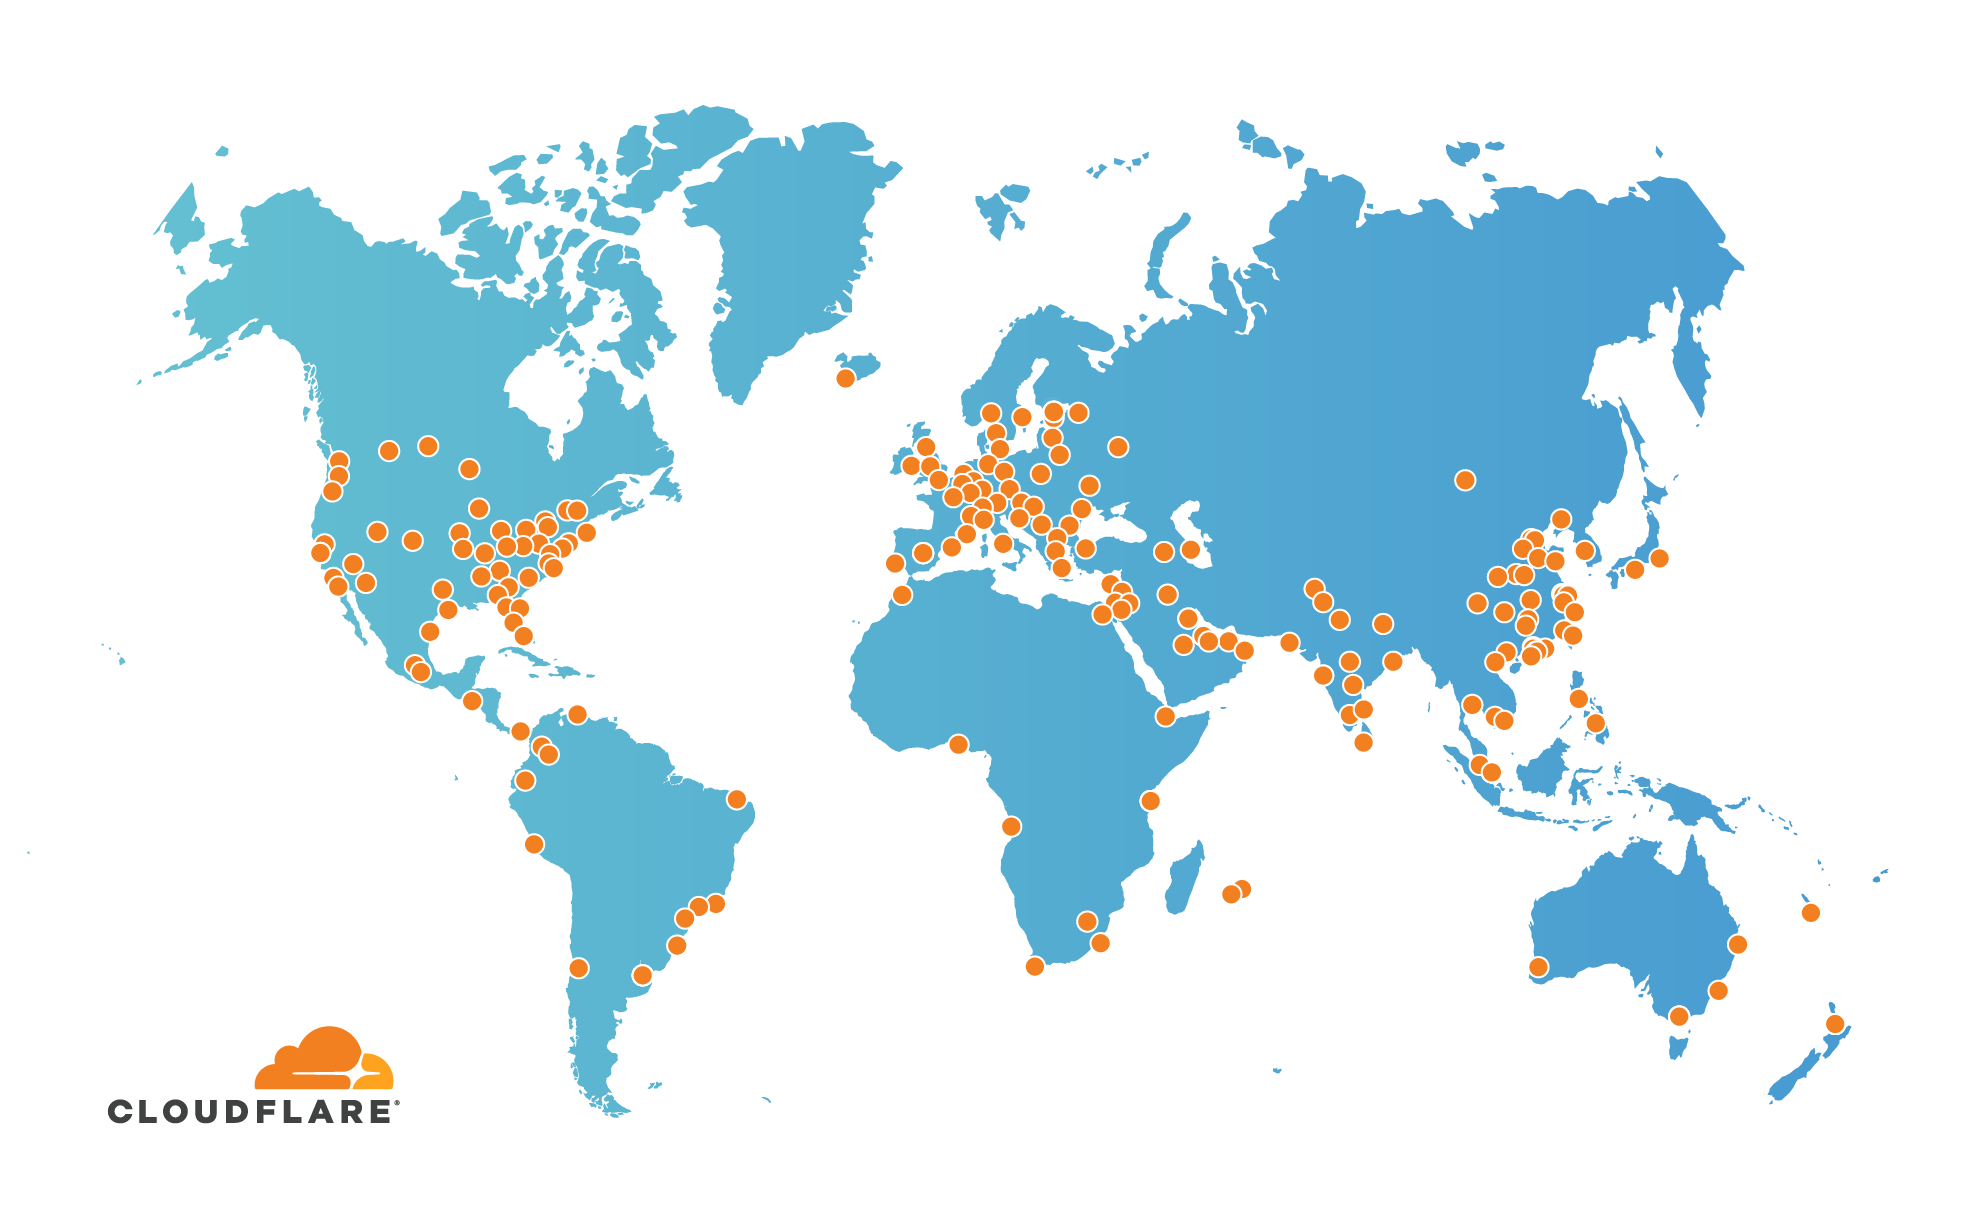 Cloudflare Global Network Expands to 193 Cities